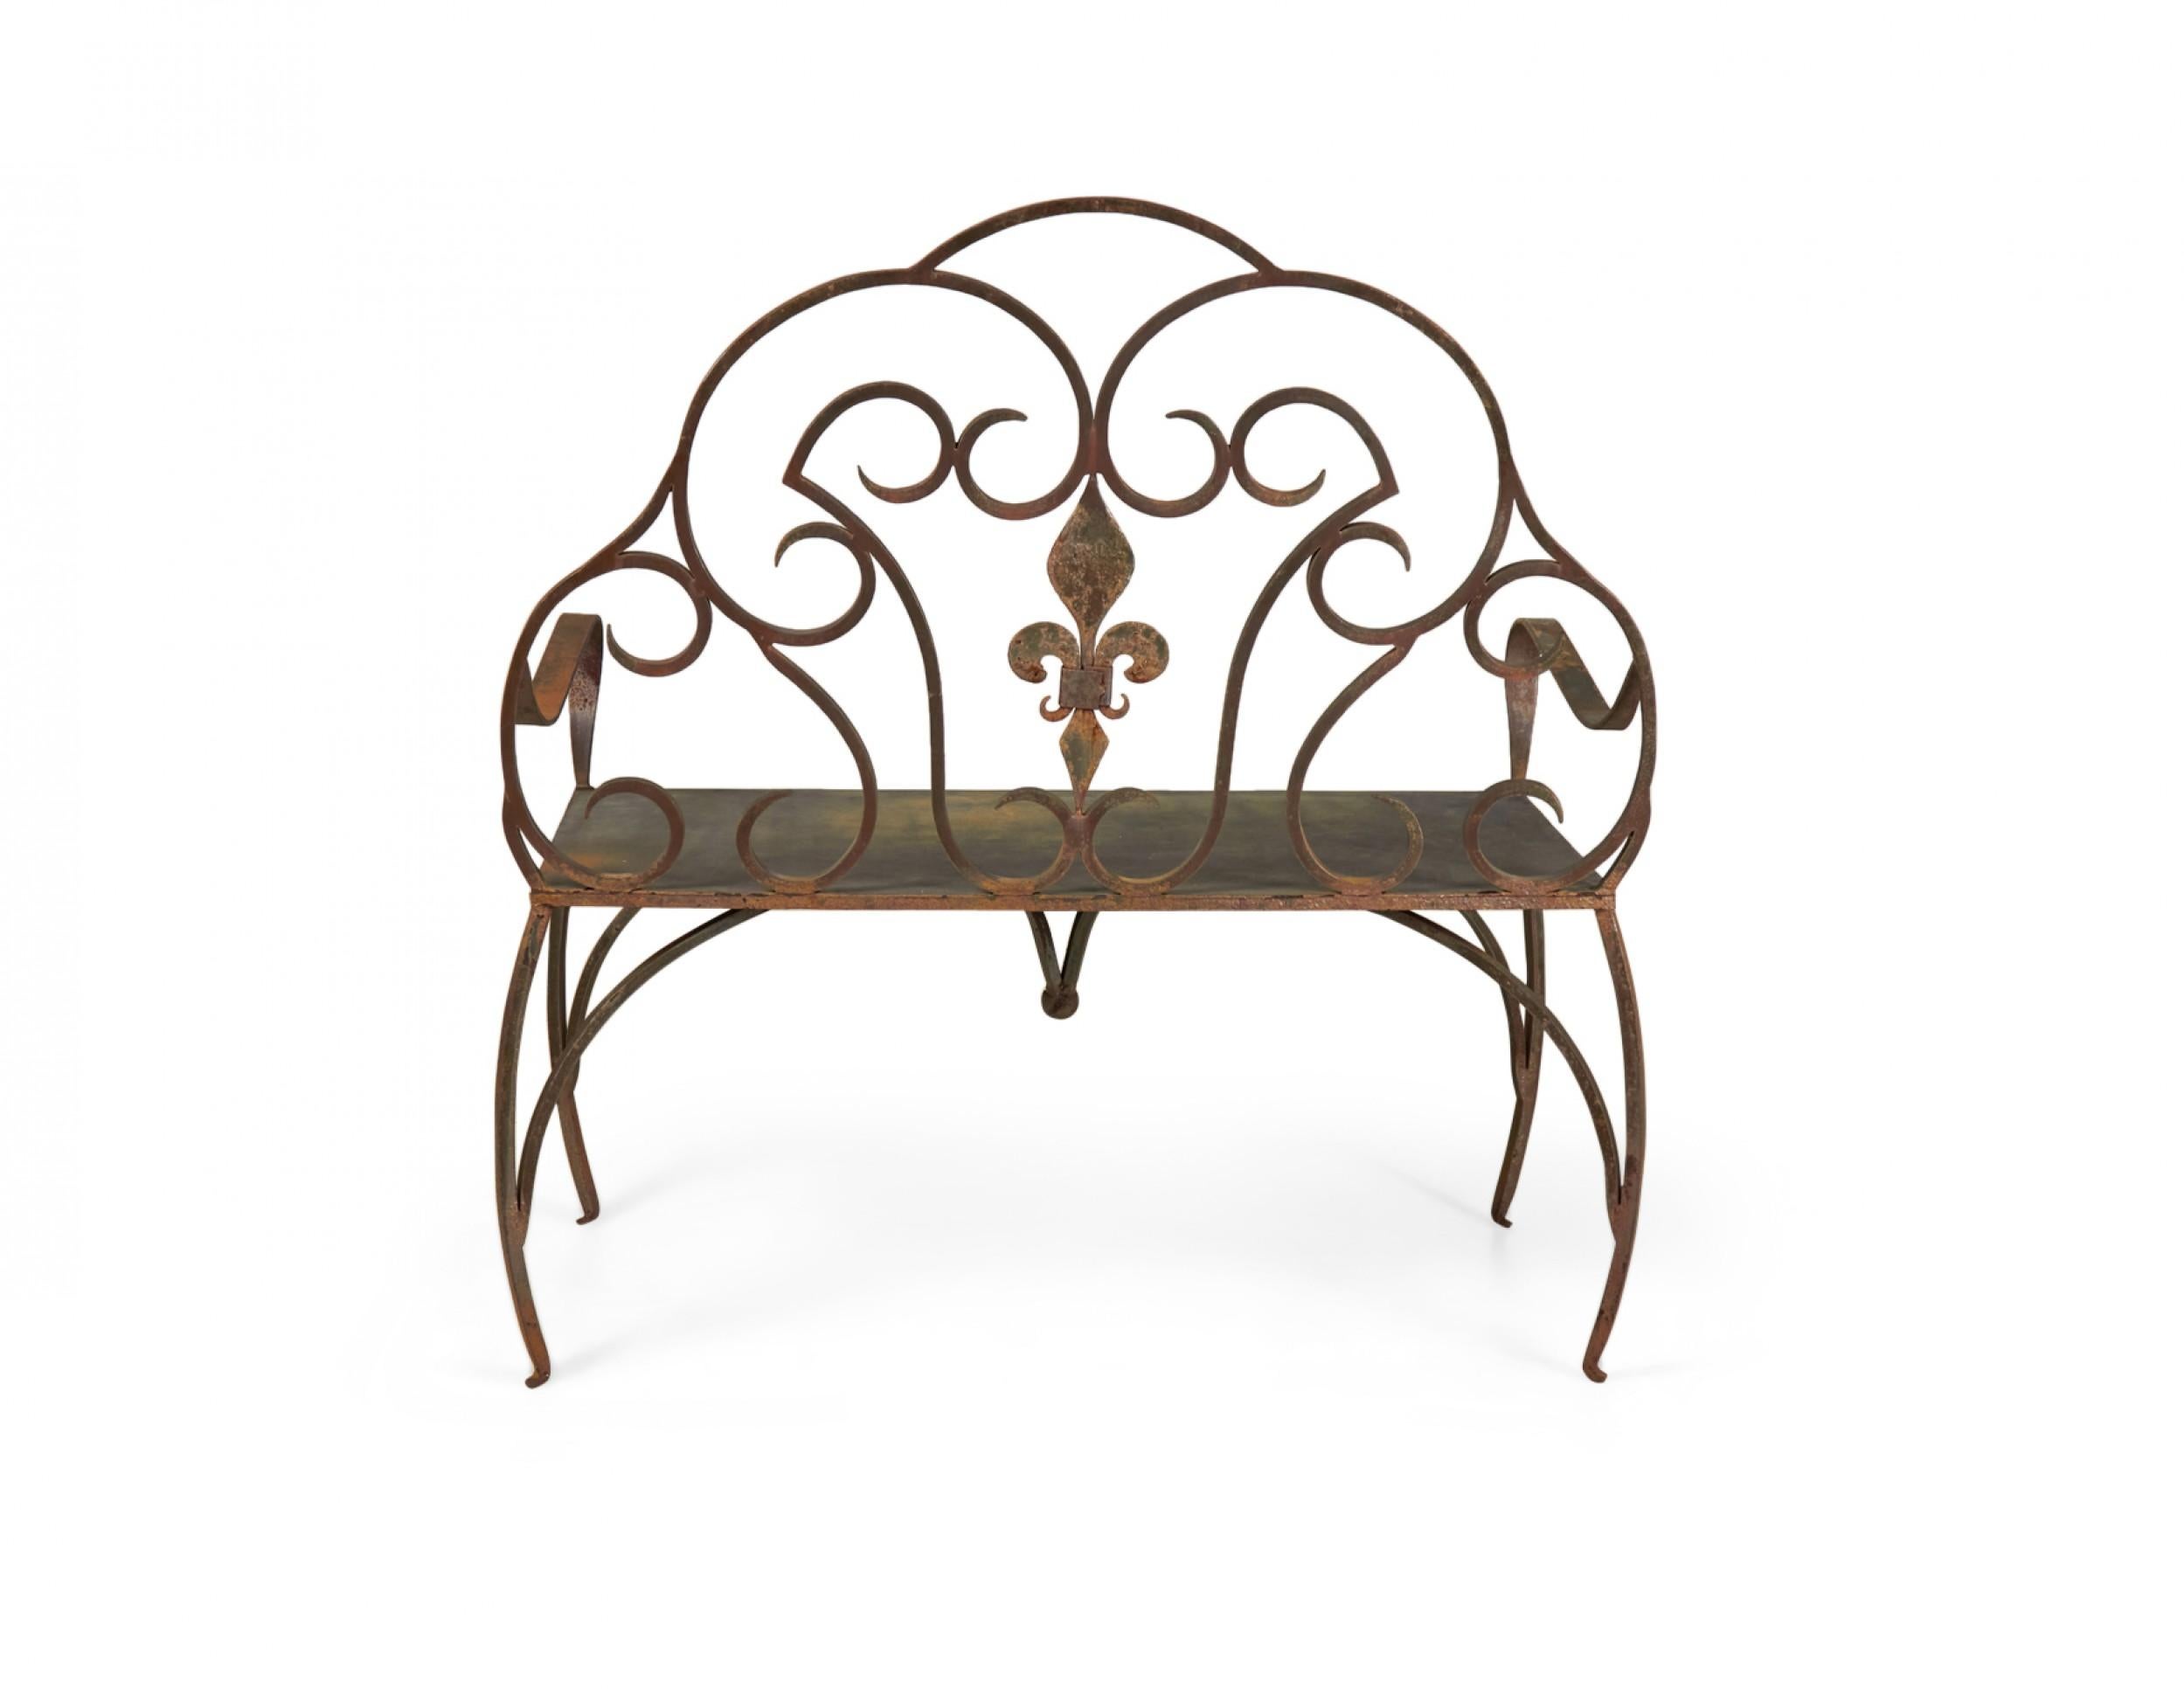 Jan Barboglio Mexican Modern Style Wrought Iron Outdoor Fleur de Lis Crest Bench In Good Condition For Sale In New York, NY